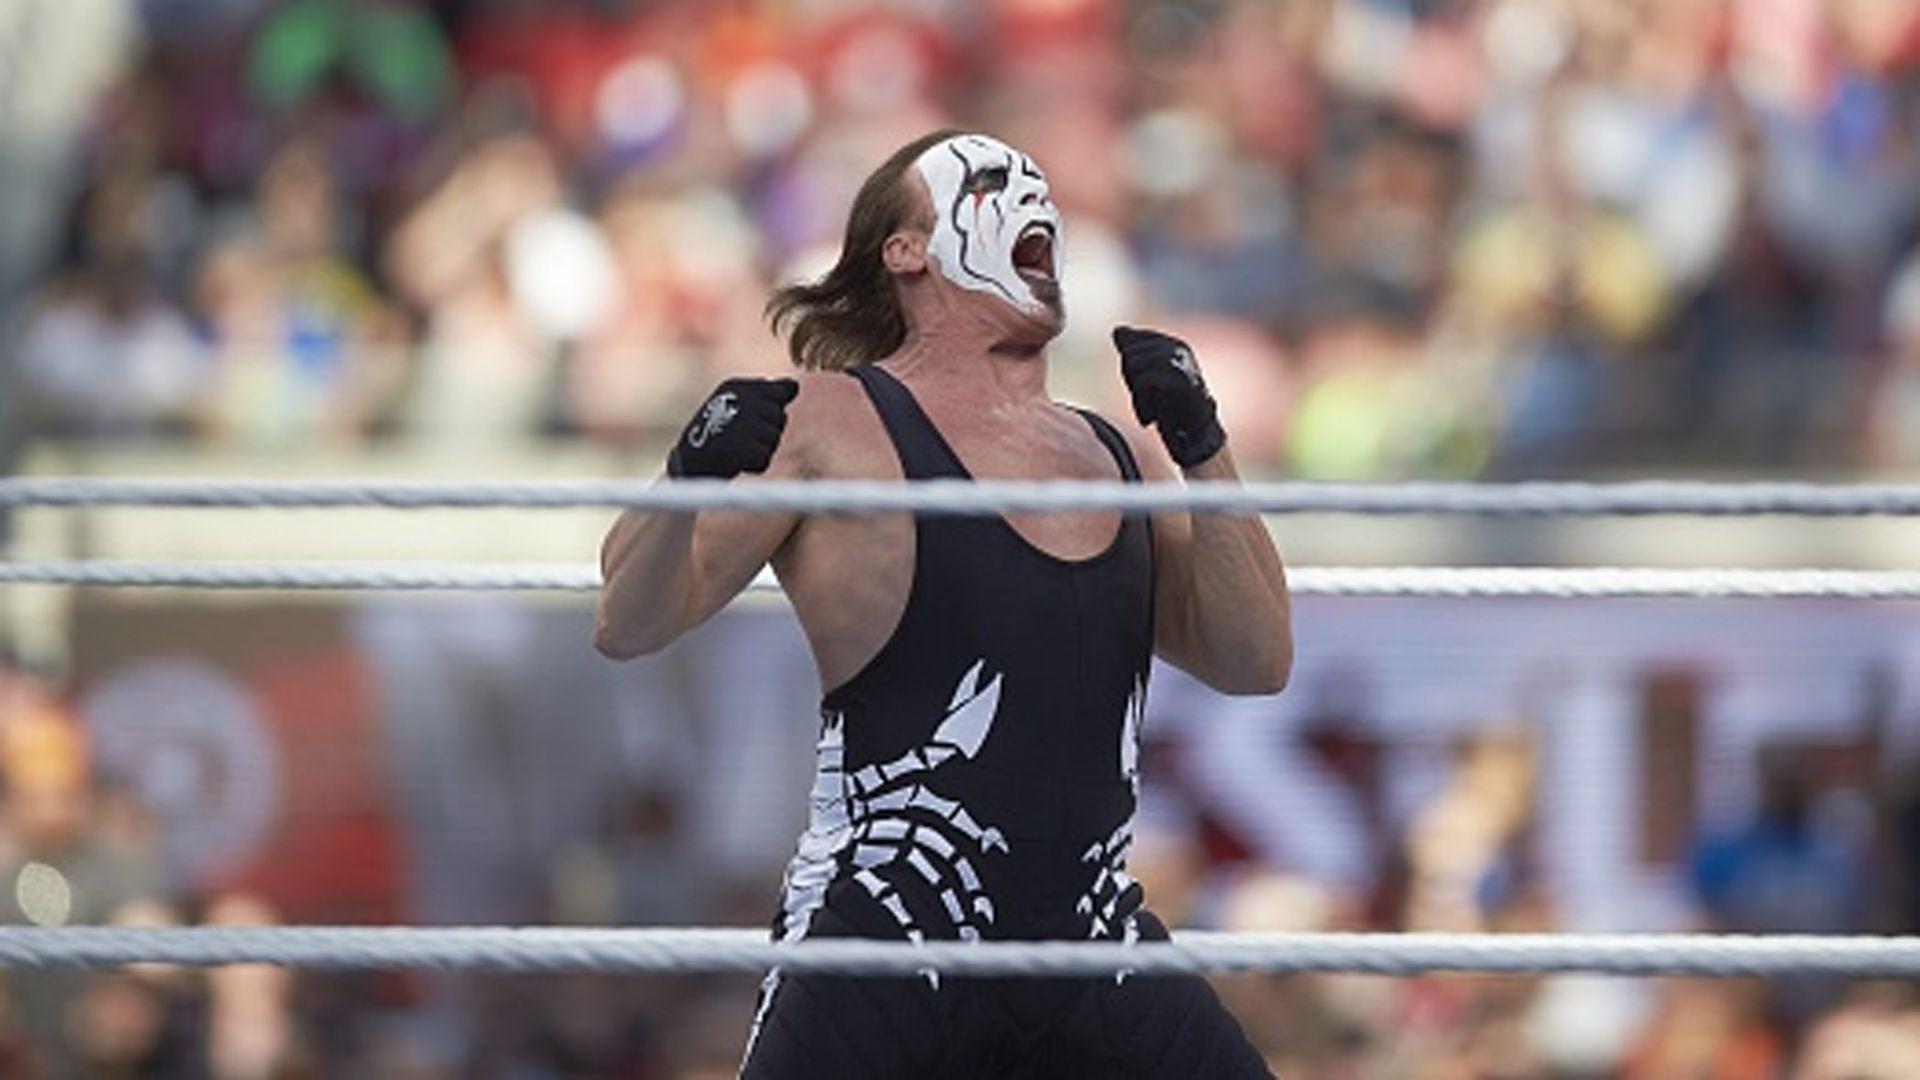 Son of wrestling icon Sting earns tryout with Chiefs. NFL